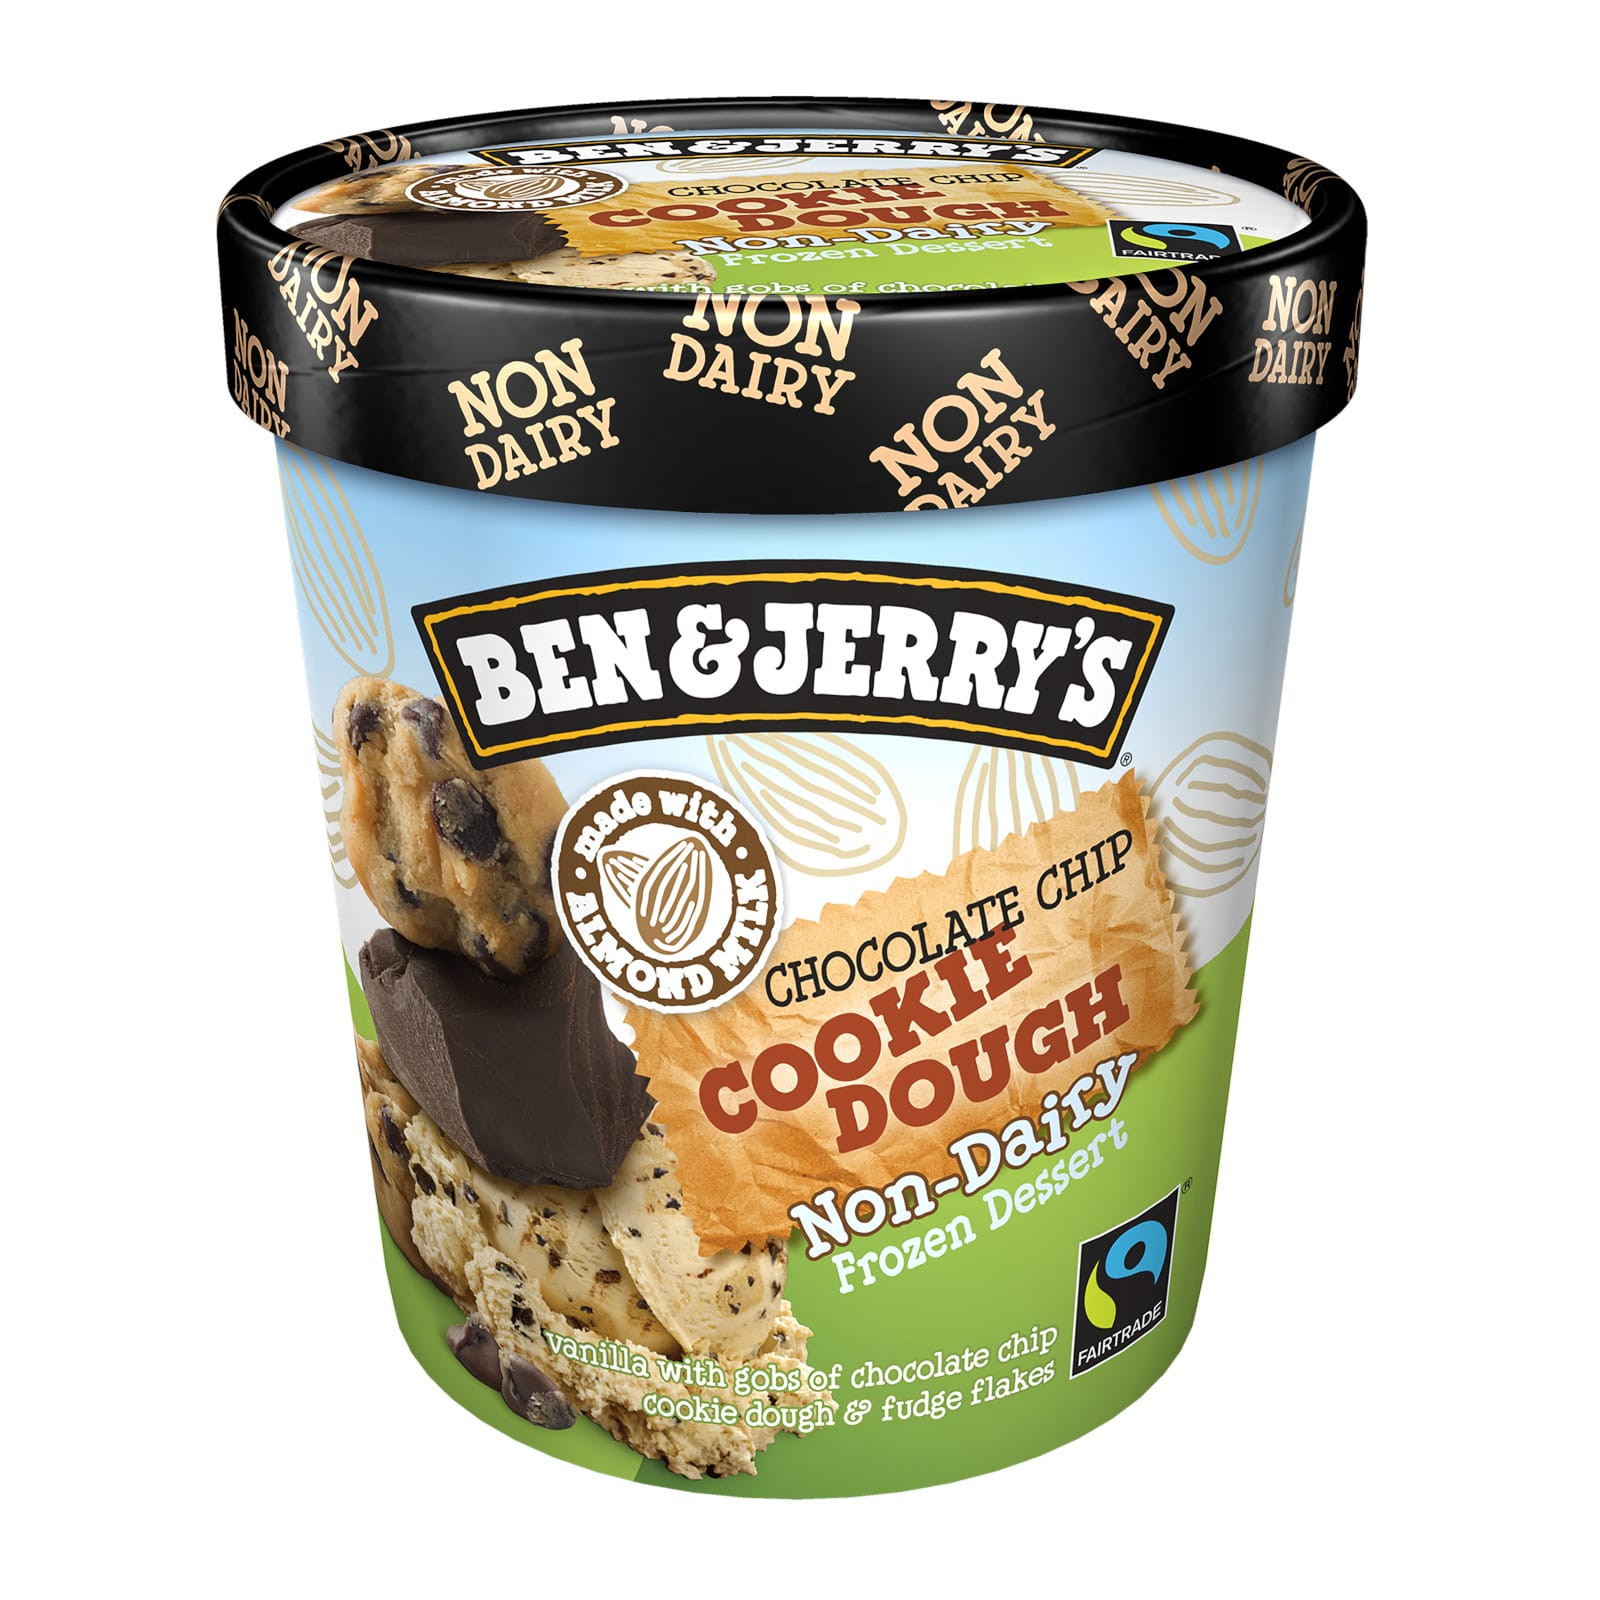 Non Dairy Chocolate Chip Cookies
 BEN & JERRY S